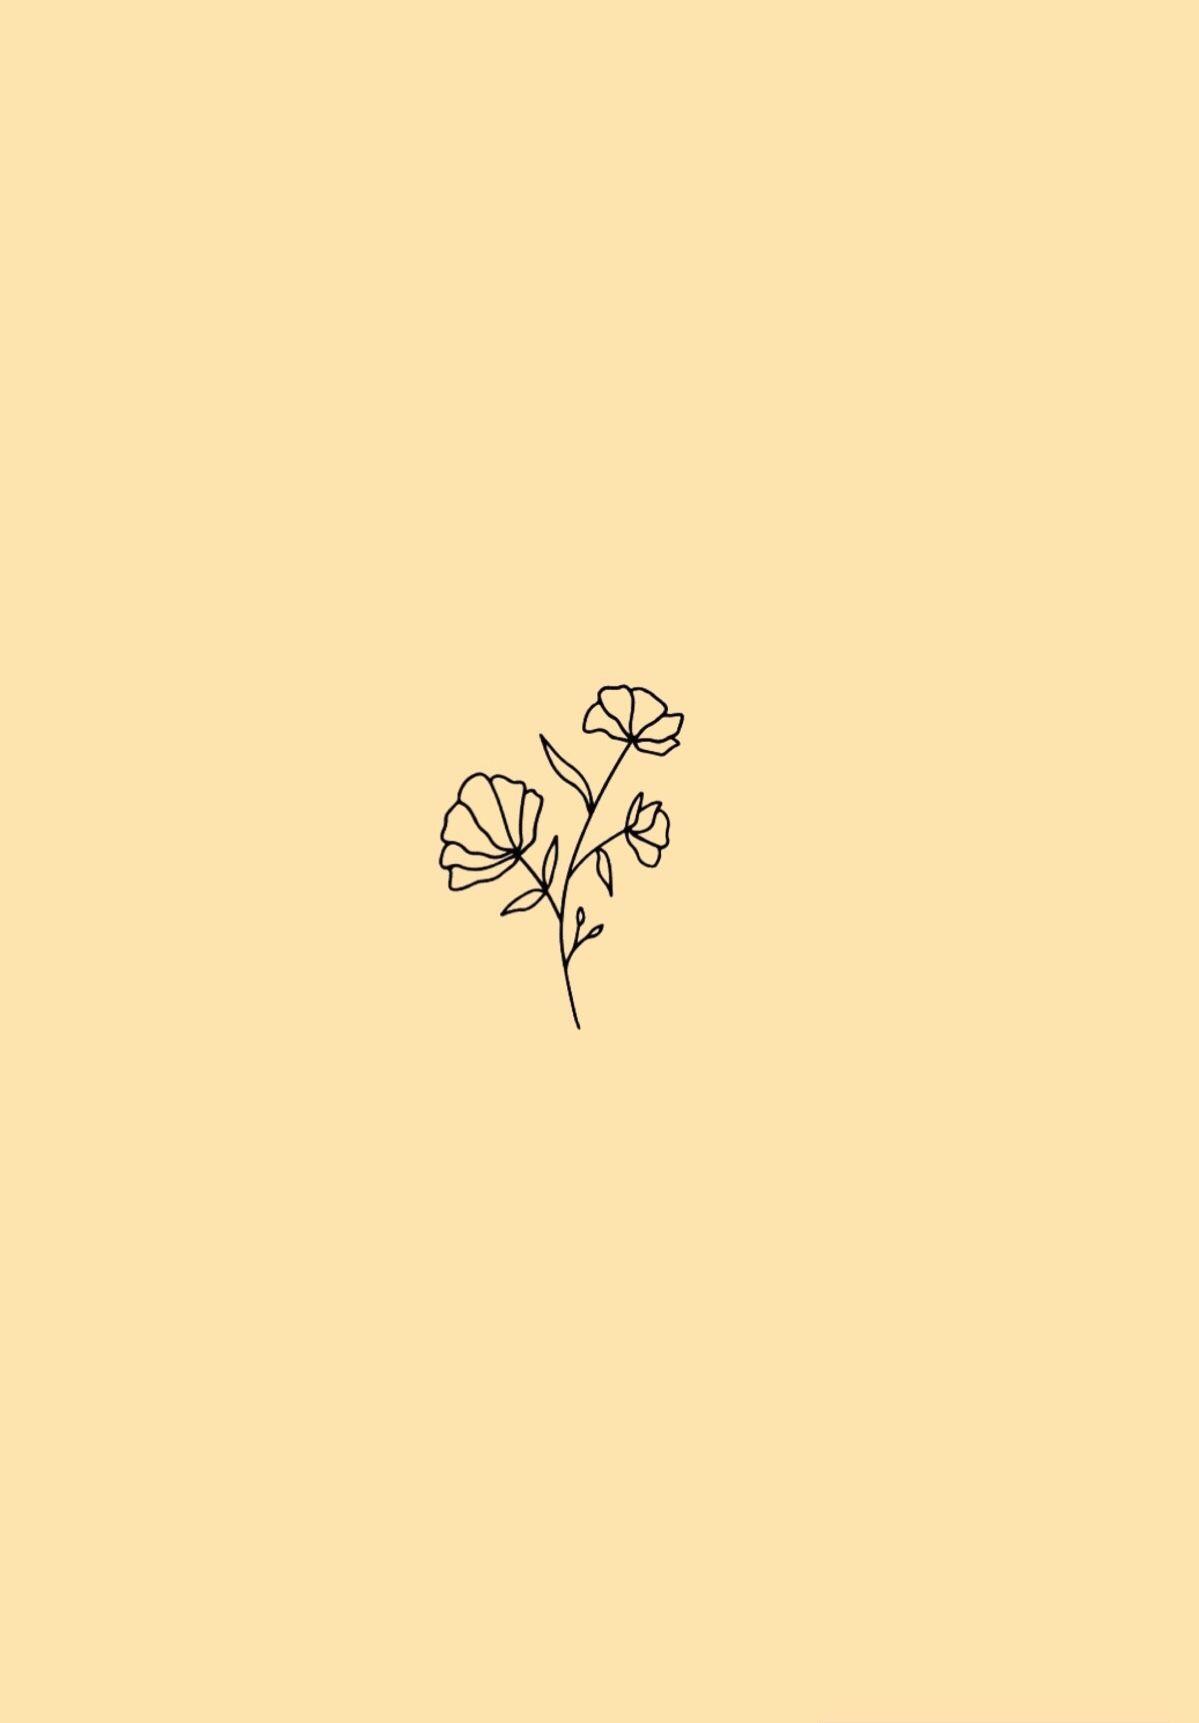 Minimalist Plant Drawing Wallpapers - Top Free Minimalist Plant Drawing